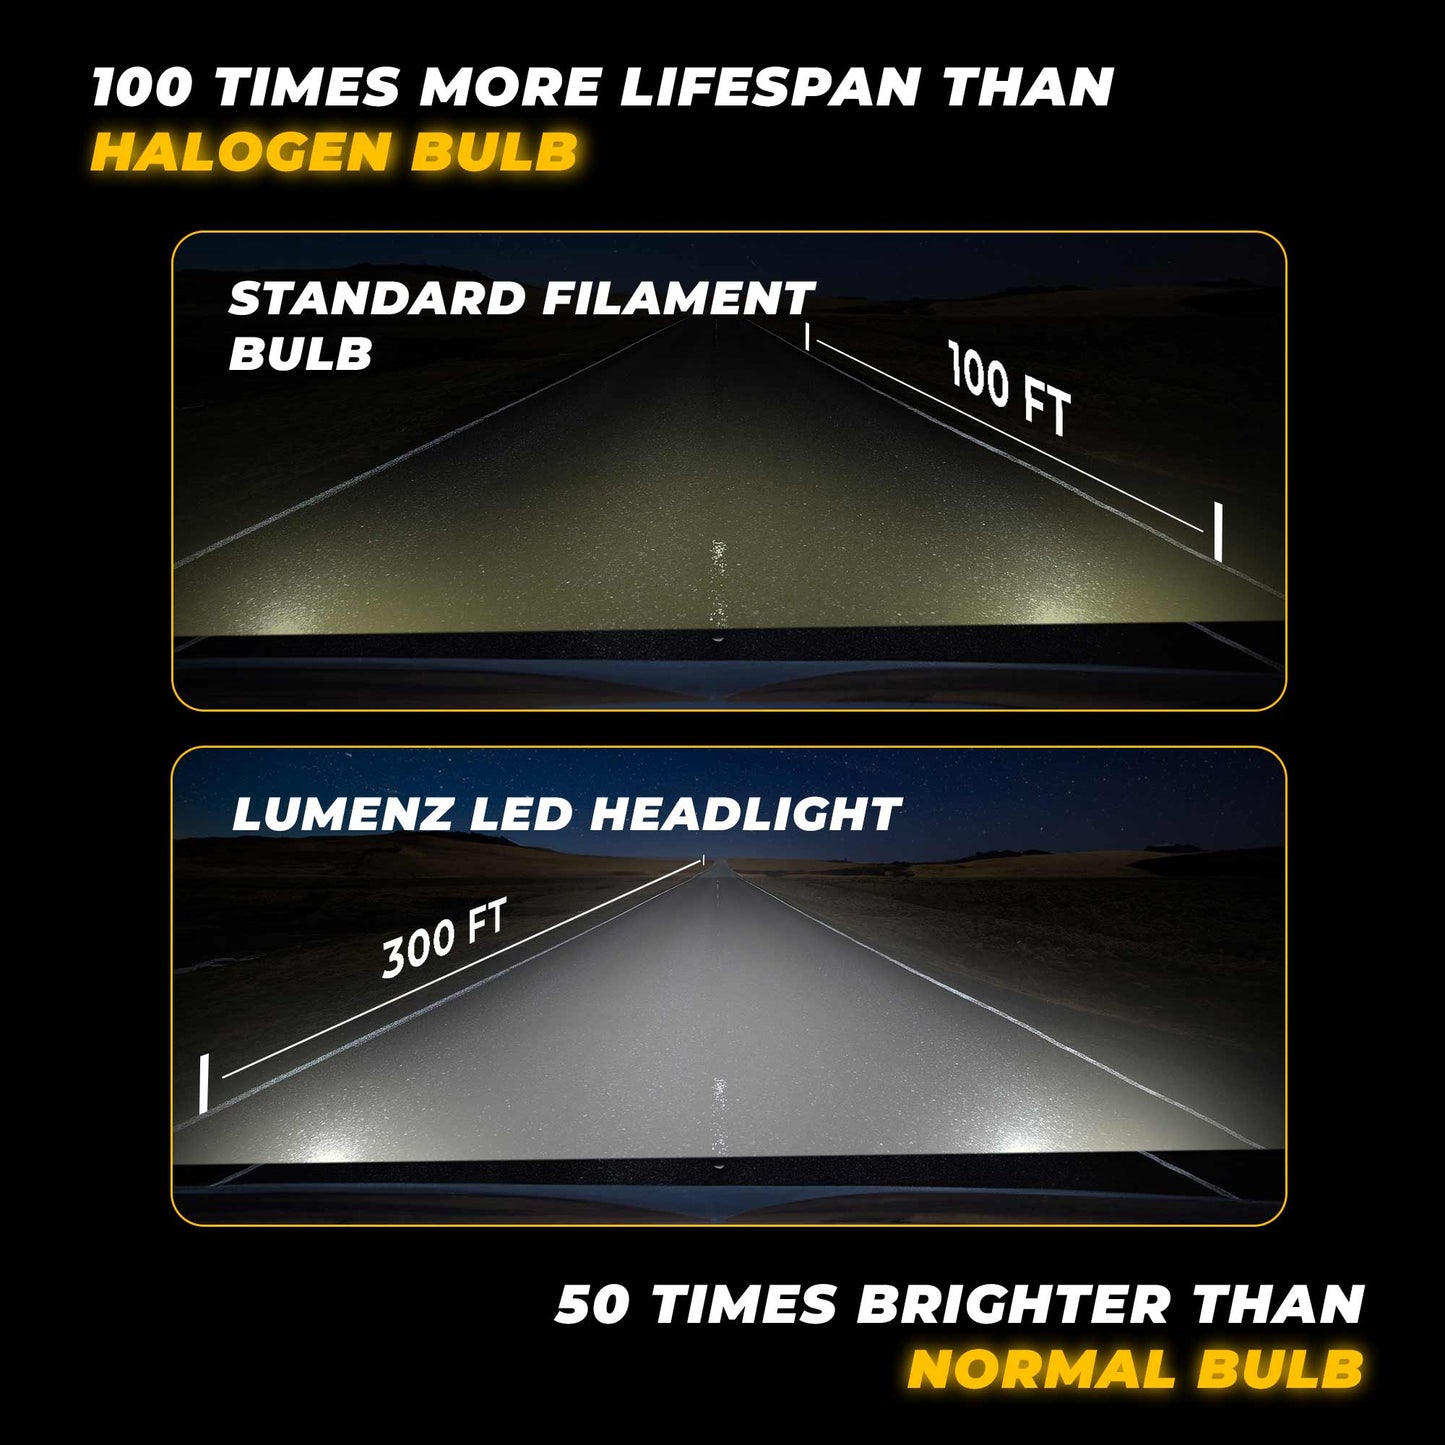 JCBL ACCESSORIES Lumenz H7 110W Car Headlight LED Bulb, 8000 Lumens Dual-Beam, 6000-6500K Day Light, Weather-Resistant IP67 Waterproof | 100 TIMES MORE LIFESPAN THAN | STANDARD FILAMENT BULB 100ft  | LUMENZ LED HEADLIGHT | 300FT | 50 TIMES BRIGHTER THAN